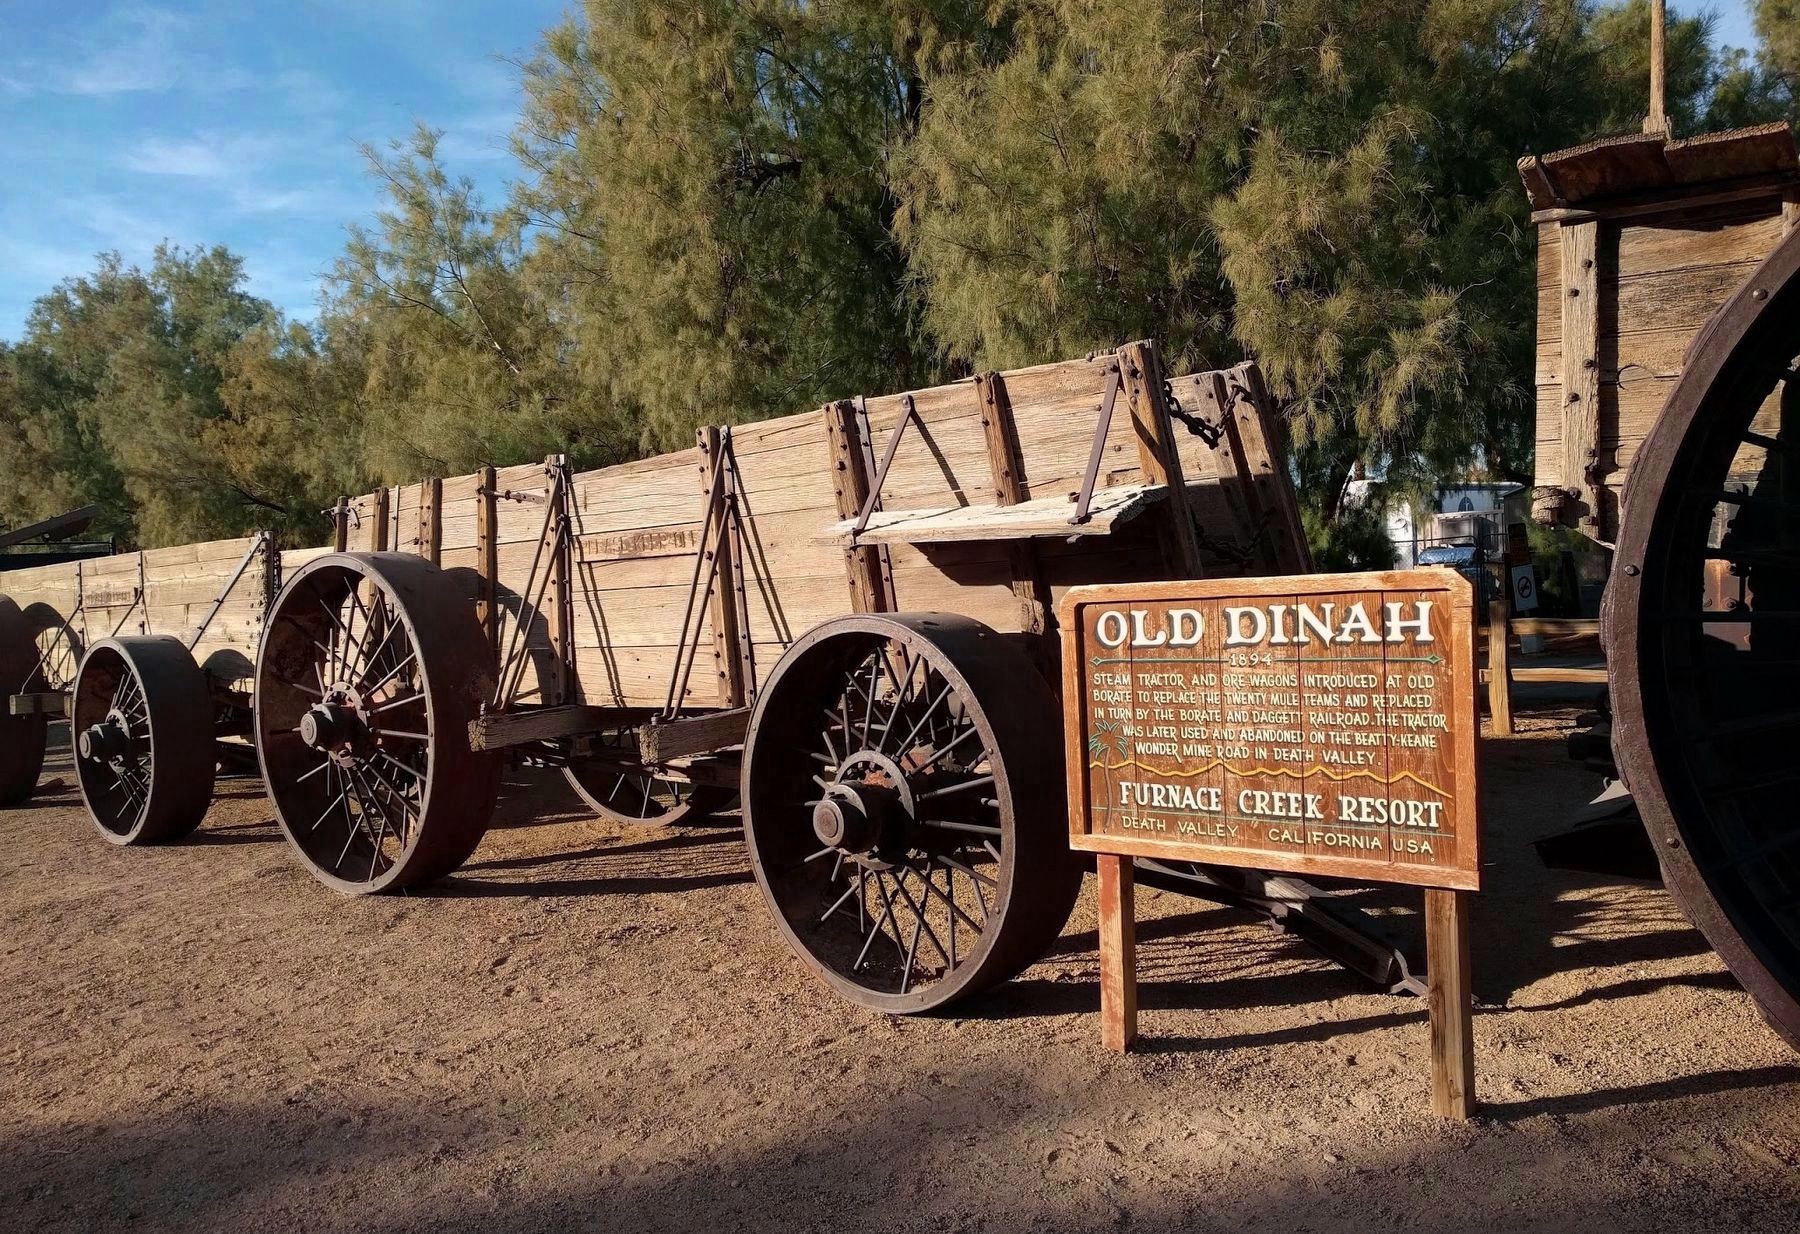 New Location and New Marker for Old Dinah, with Same Old Text. image. Click for full size.